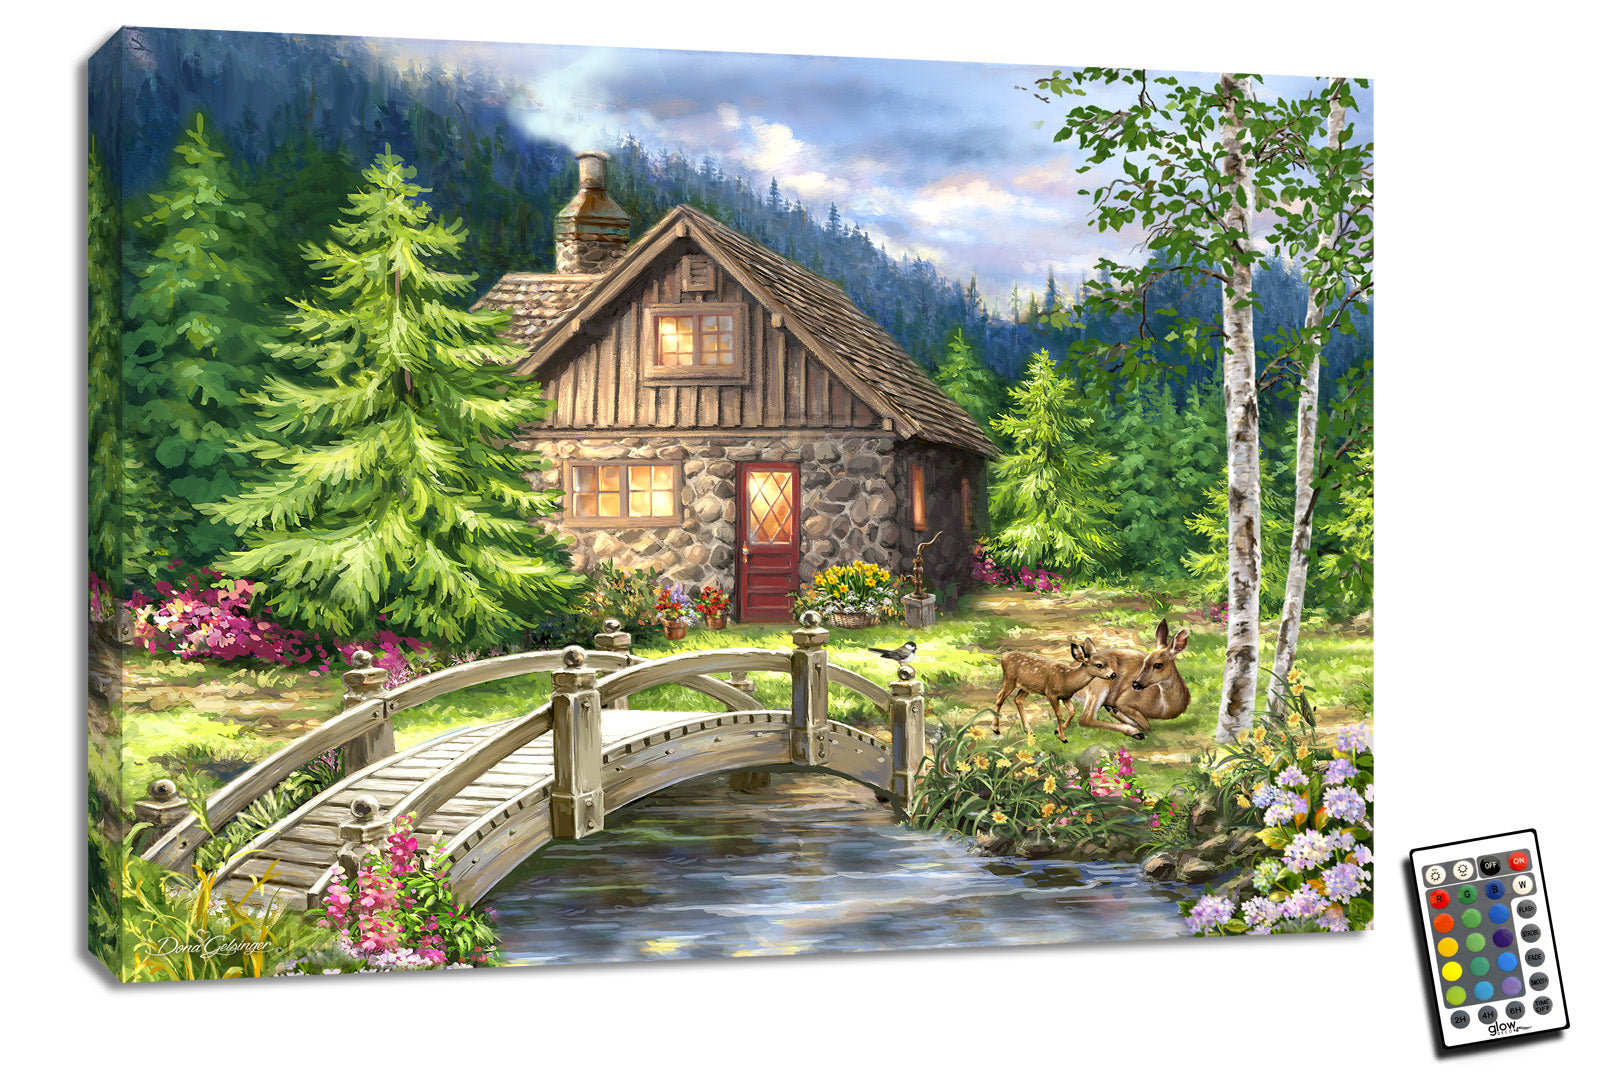 This captivating piece of art will transport you to a serene setting where a tranquil stream flows amidst lush flowers, and a quaint walking bridge beckons you to explore. A gentle doe and her fawn bask in the warmth of the sun nearby, adding to the idyllic charm of the scene.